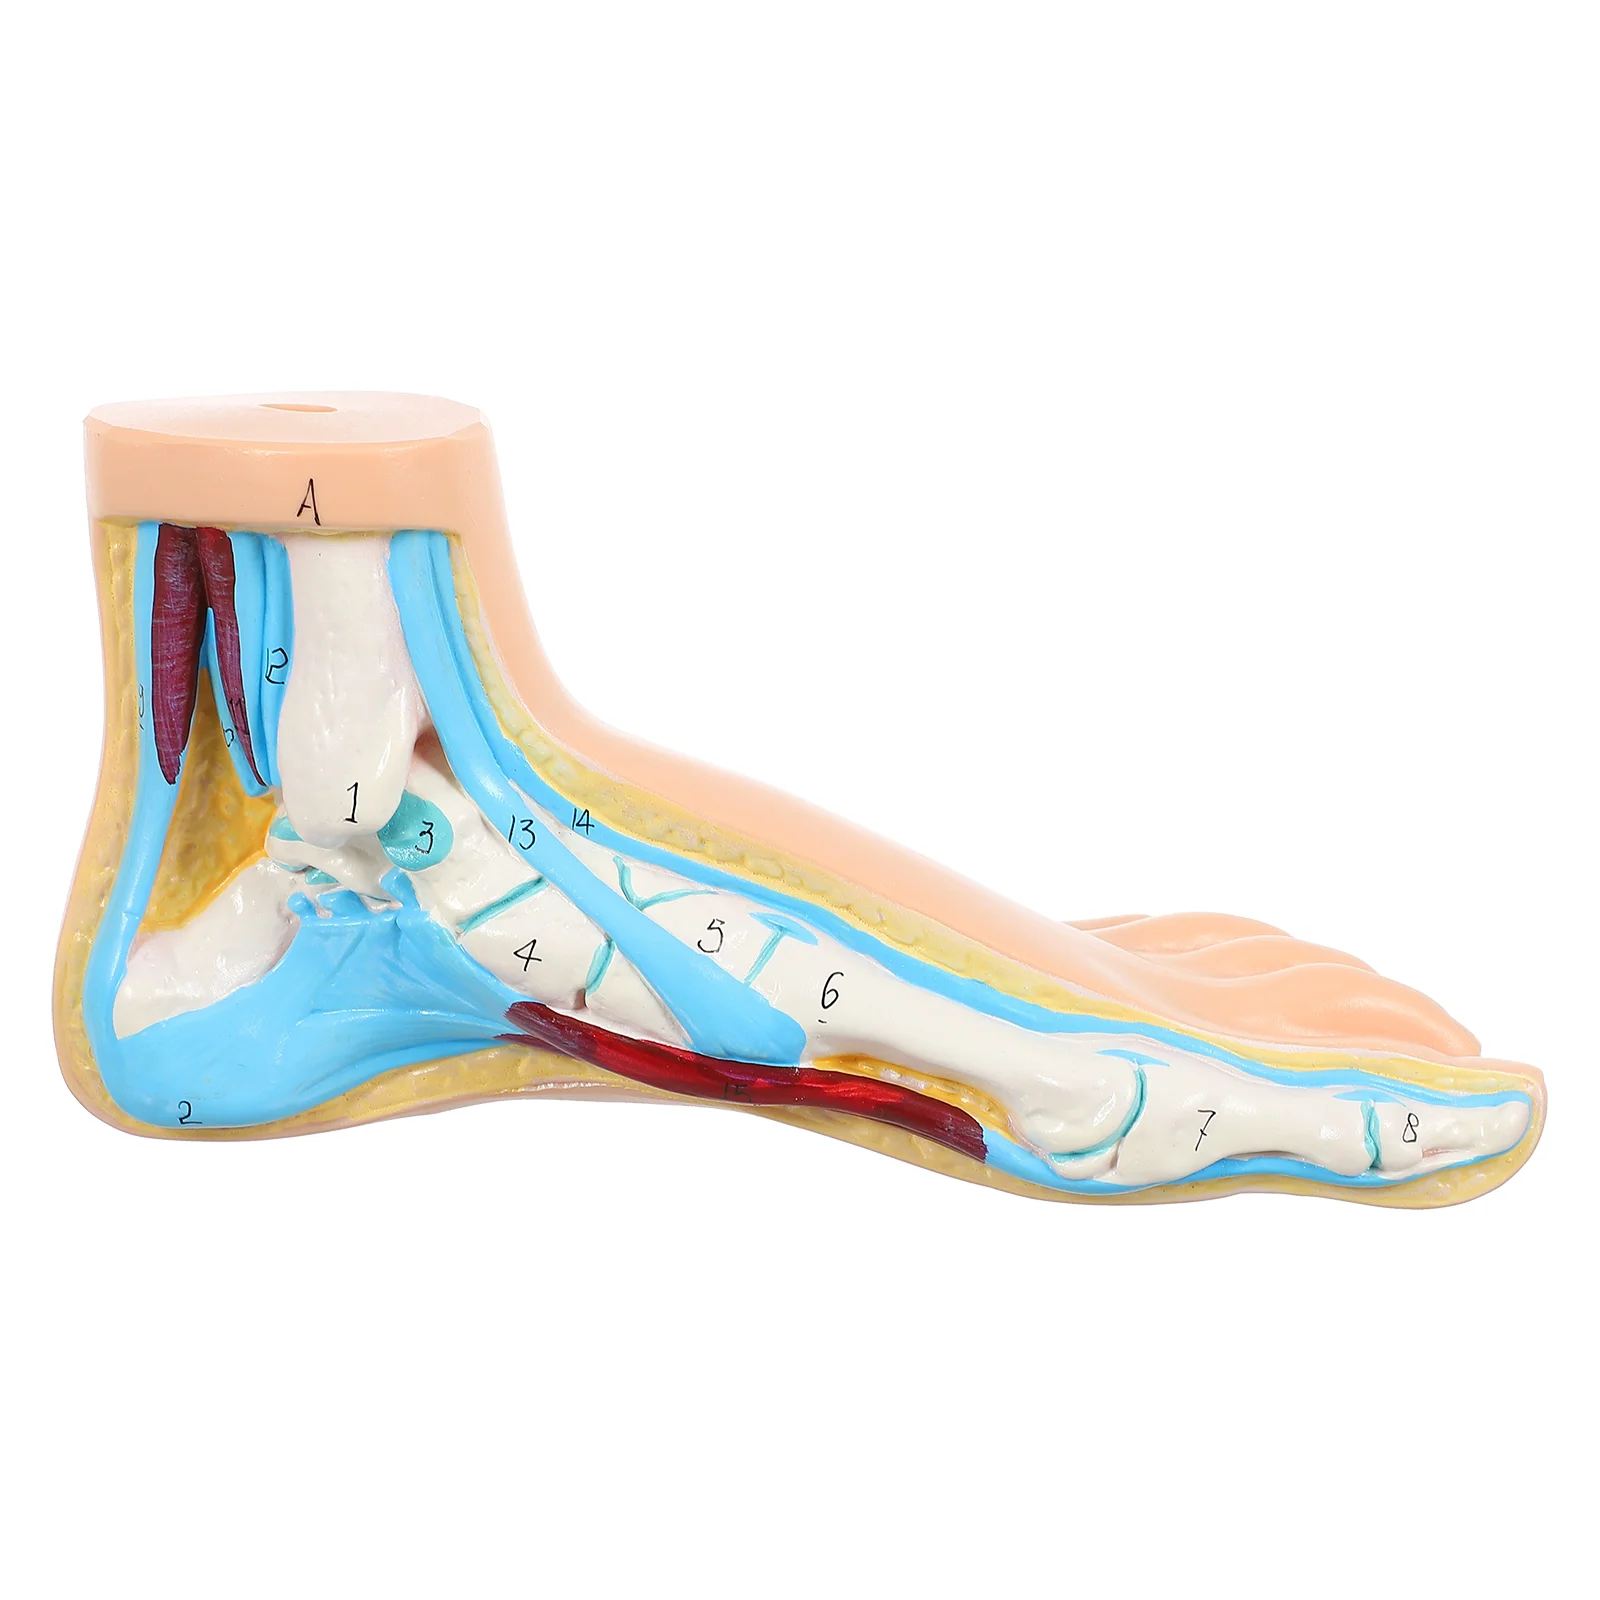 

Foot Joint Model Anatomical Anatomy Display Normal Mannequin Ordinary Clinic Mold Vinyl Medical Human Teaching Body